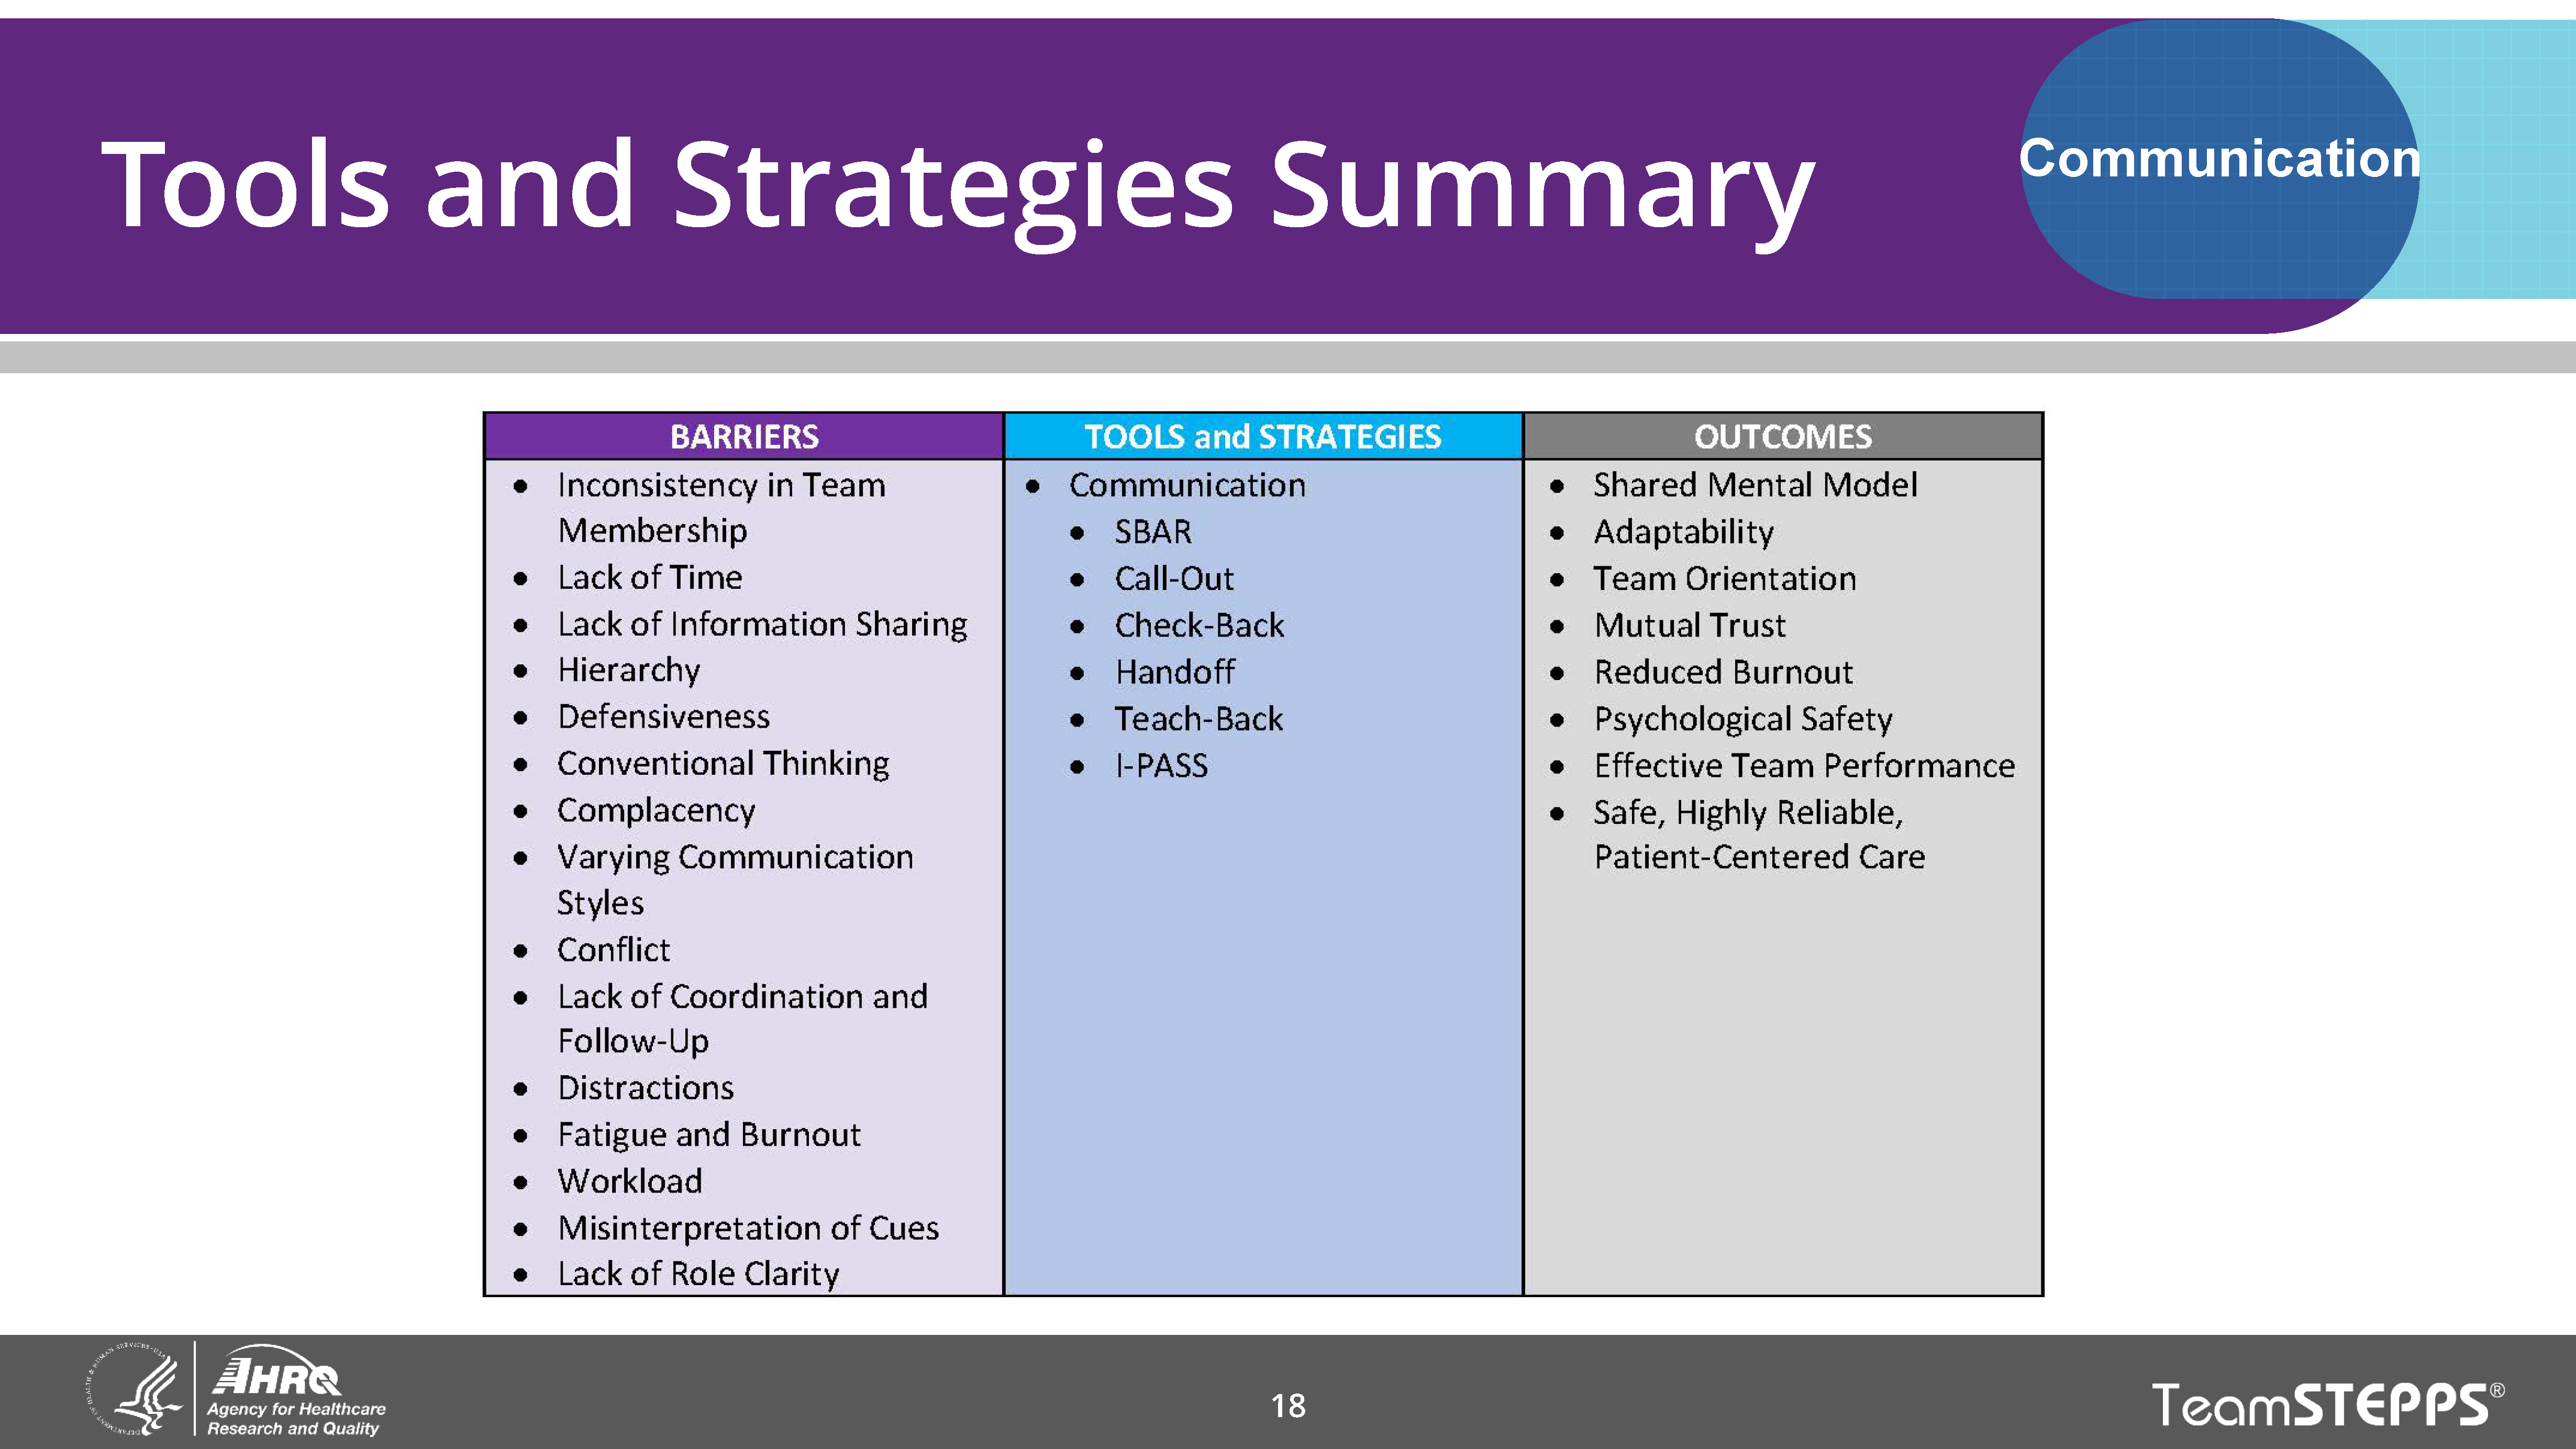 Image of slide: Use of communication tools to address barriers helps achieve positive outcomes for patients and teams.